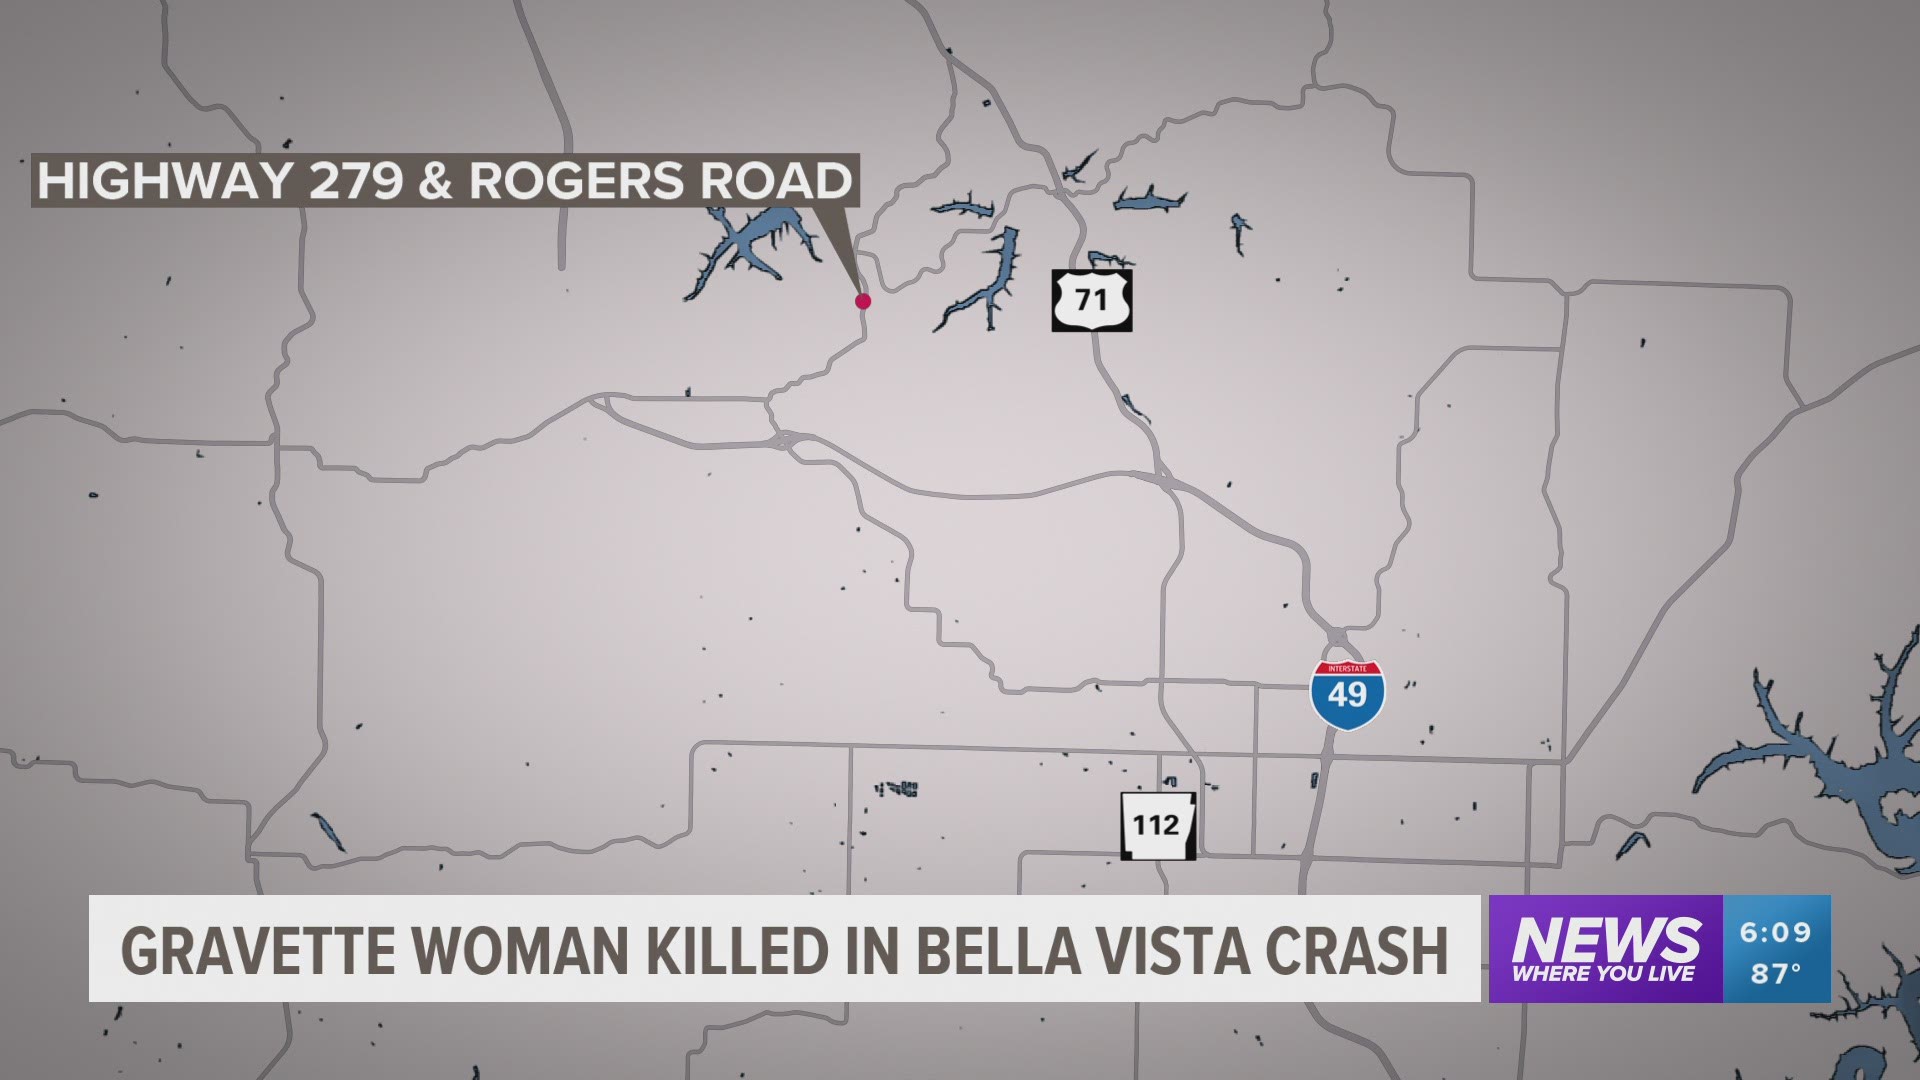 The woman died after being struck by a large commercial truck.